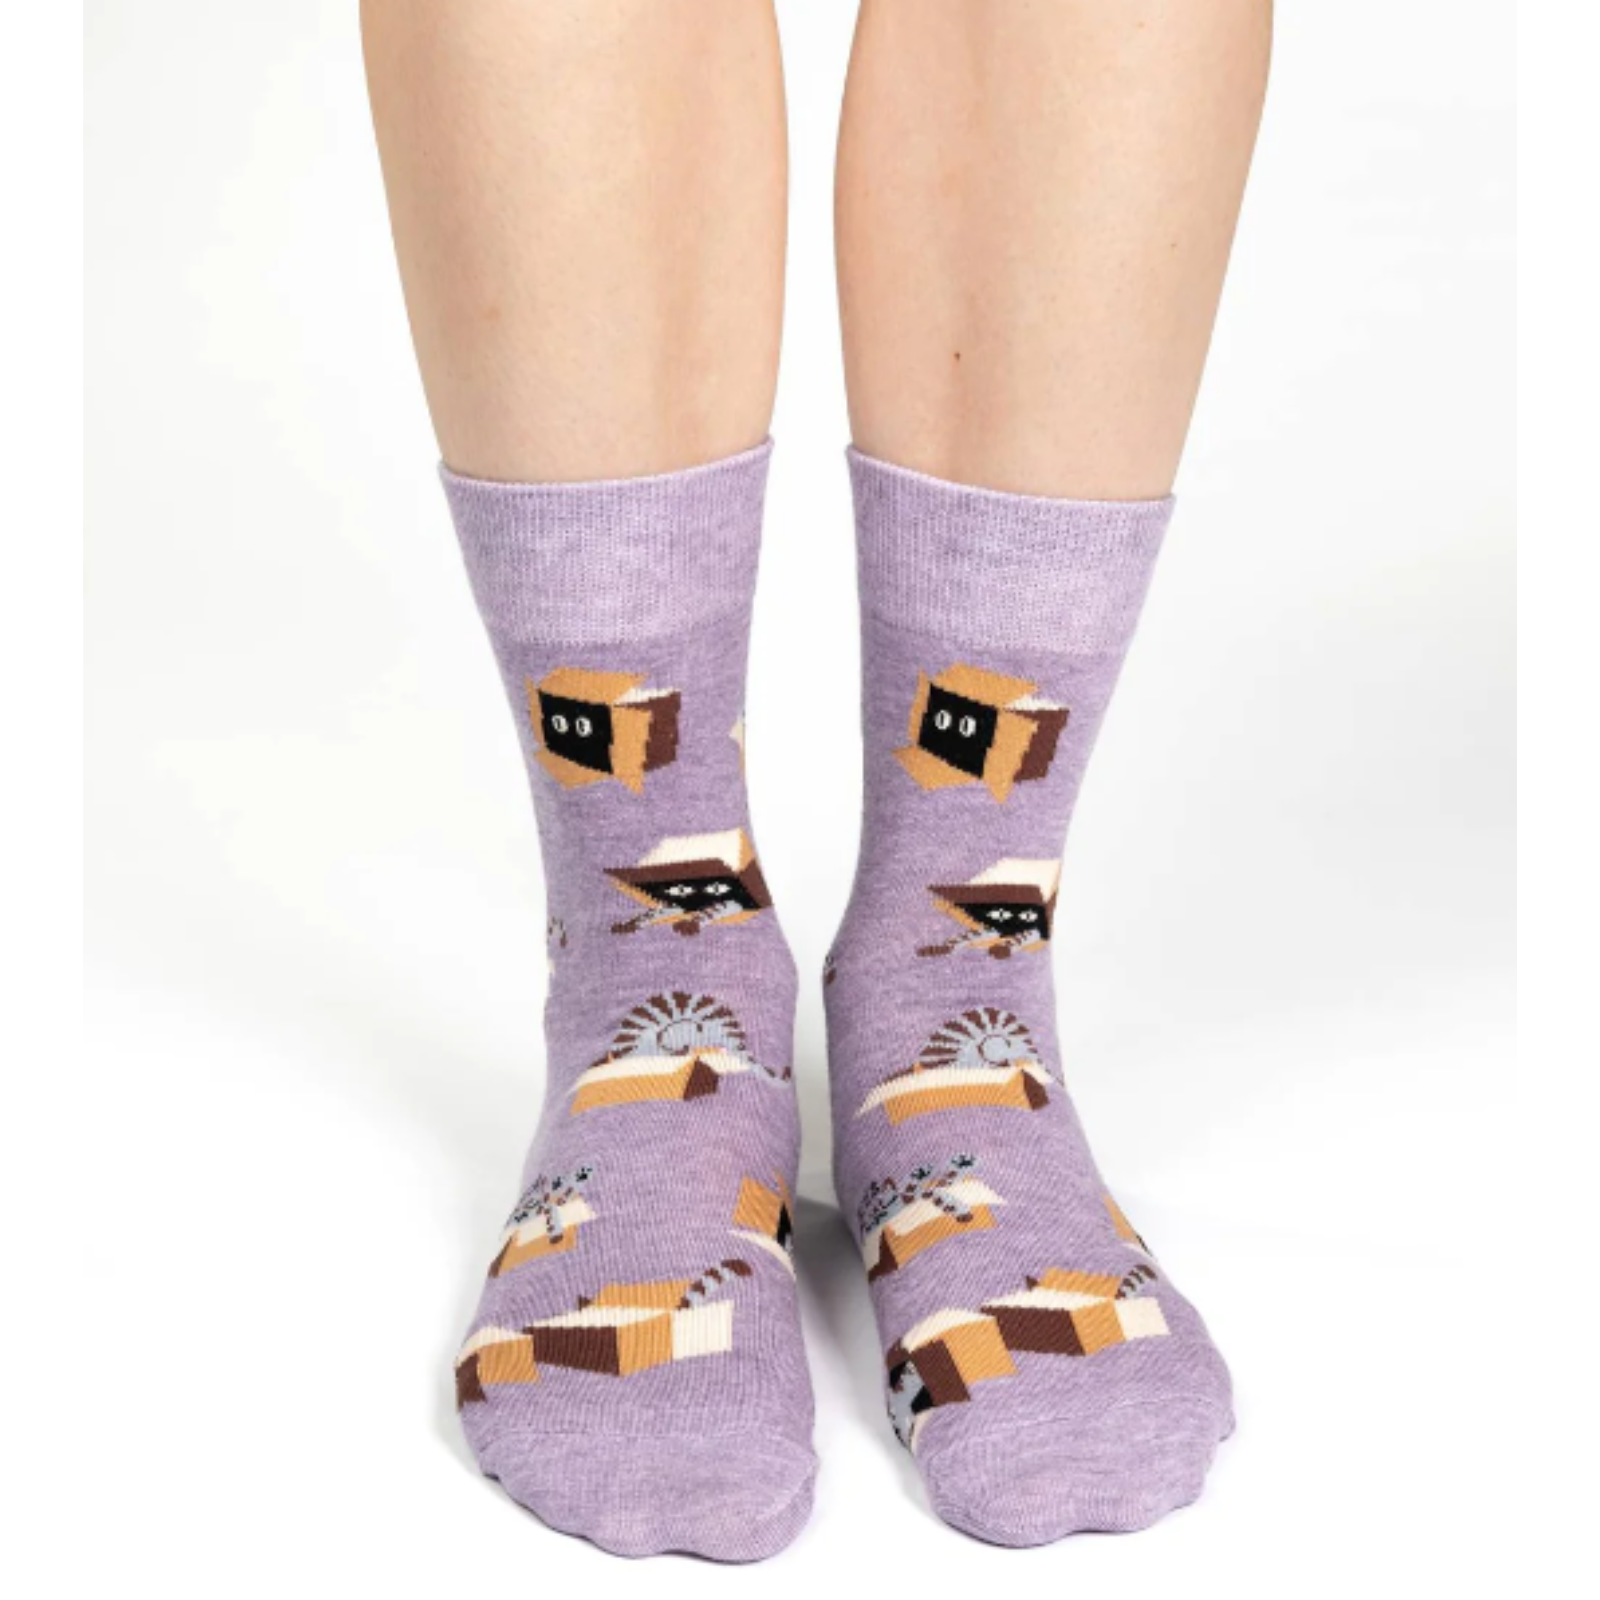 Good Luck Sock Cat In A Box women's crew sock featuring purple socks with cats playing in boxes all over. Socks shown on model's feet. 